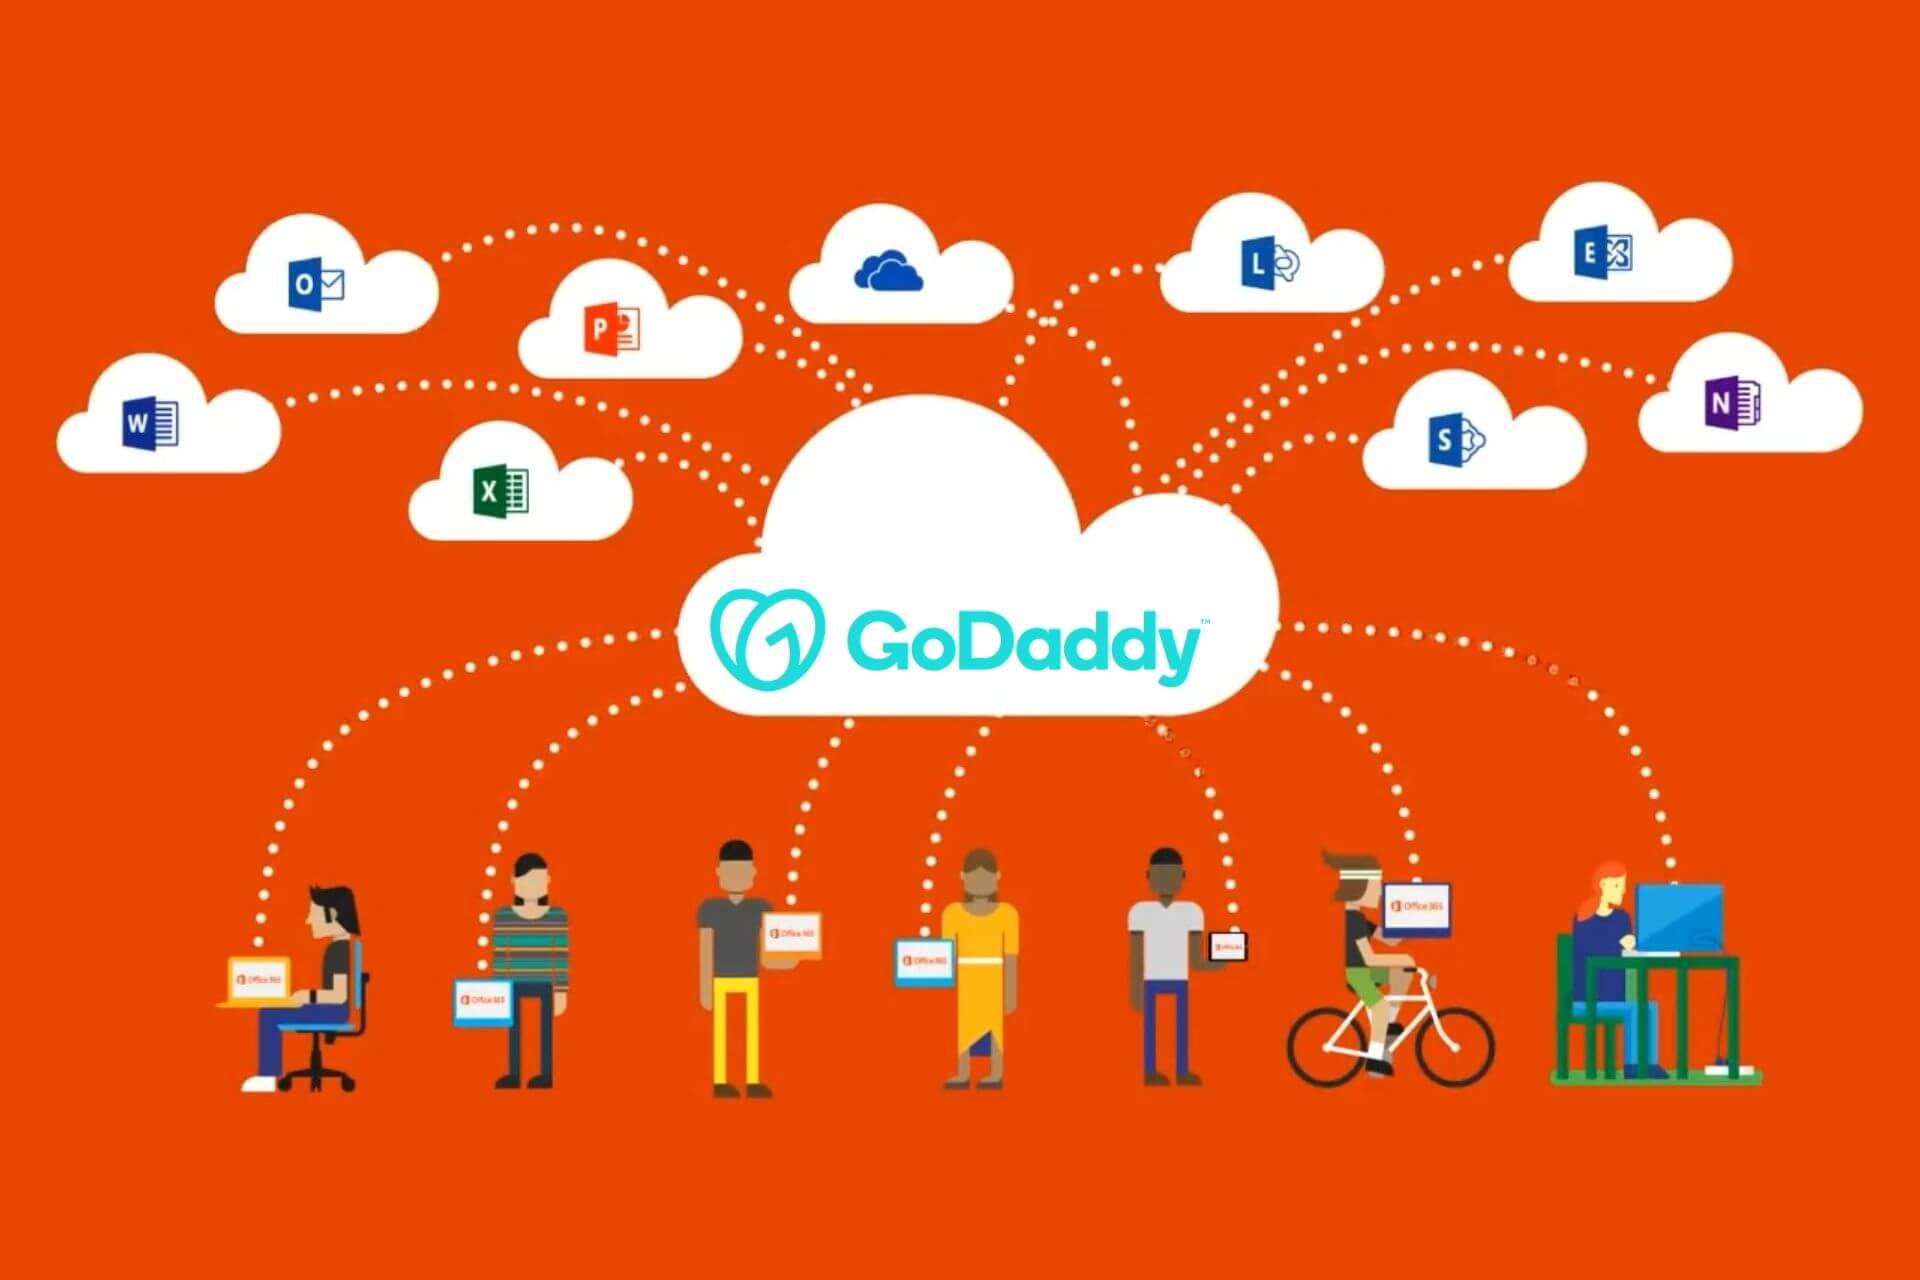 GoDaddy Office 365 review